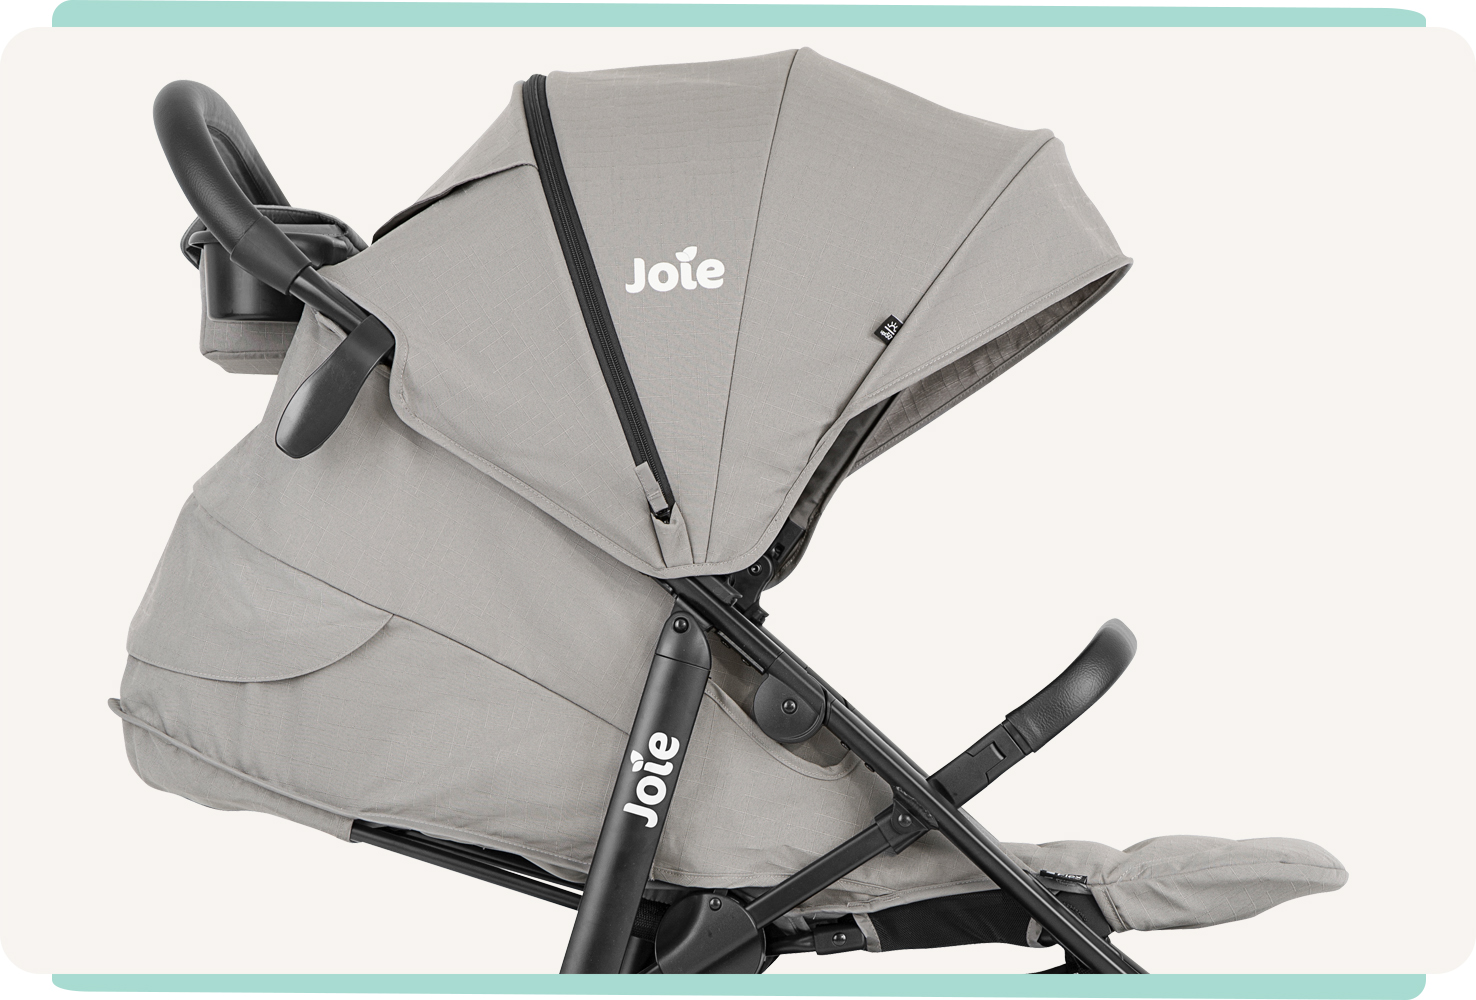 Joie litetrax pro air stroller in gray reclined and hood fully extended. 